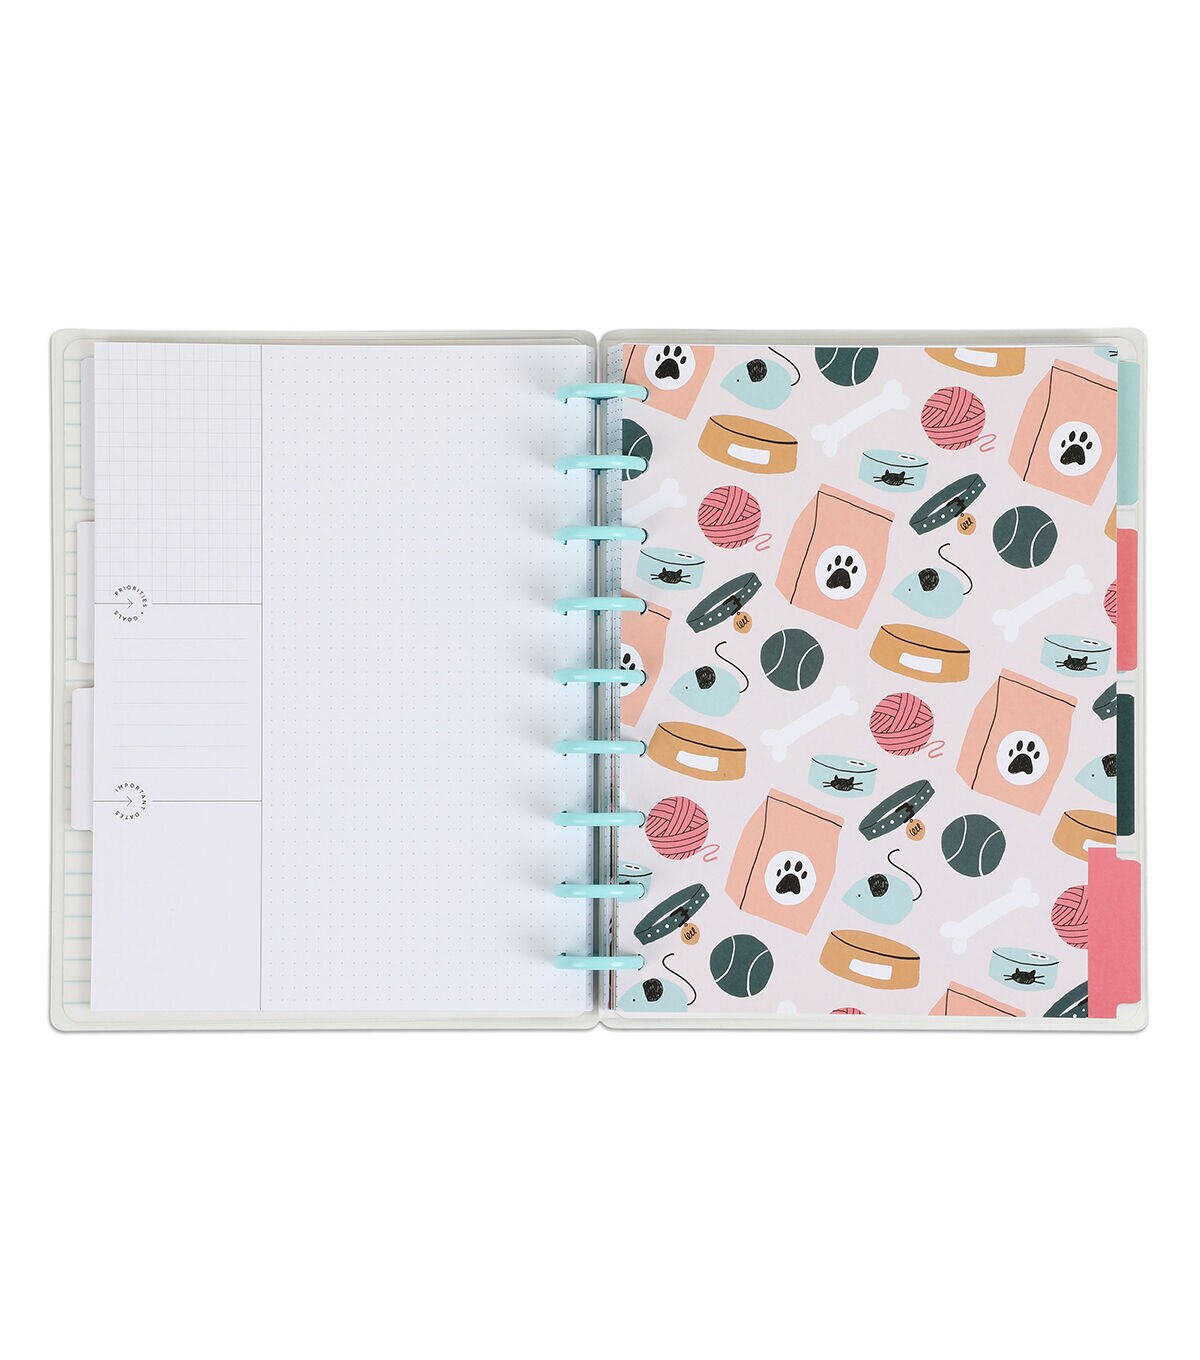 Happy Planner 101 - Organization Obsessed